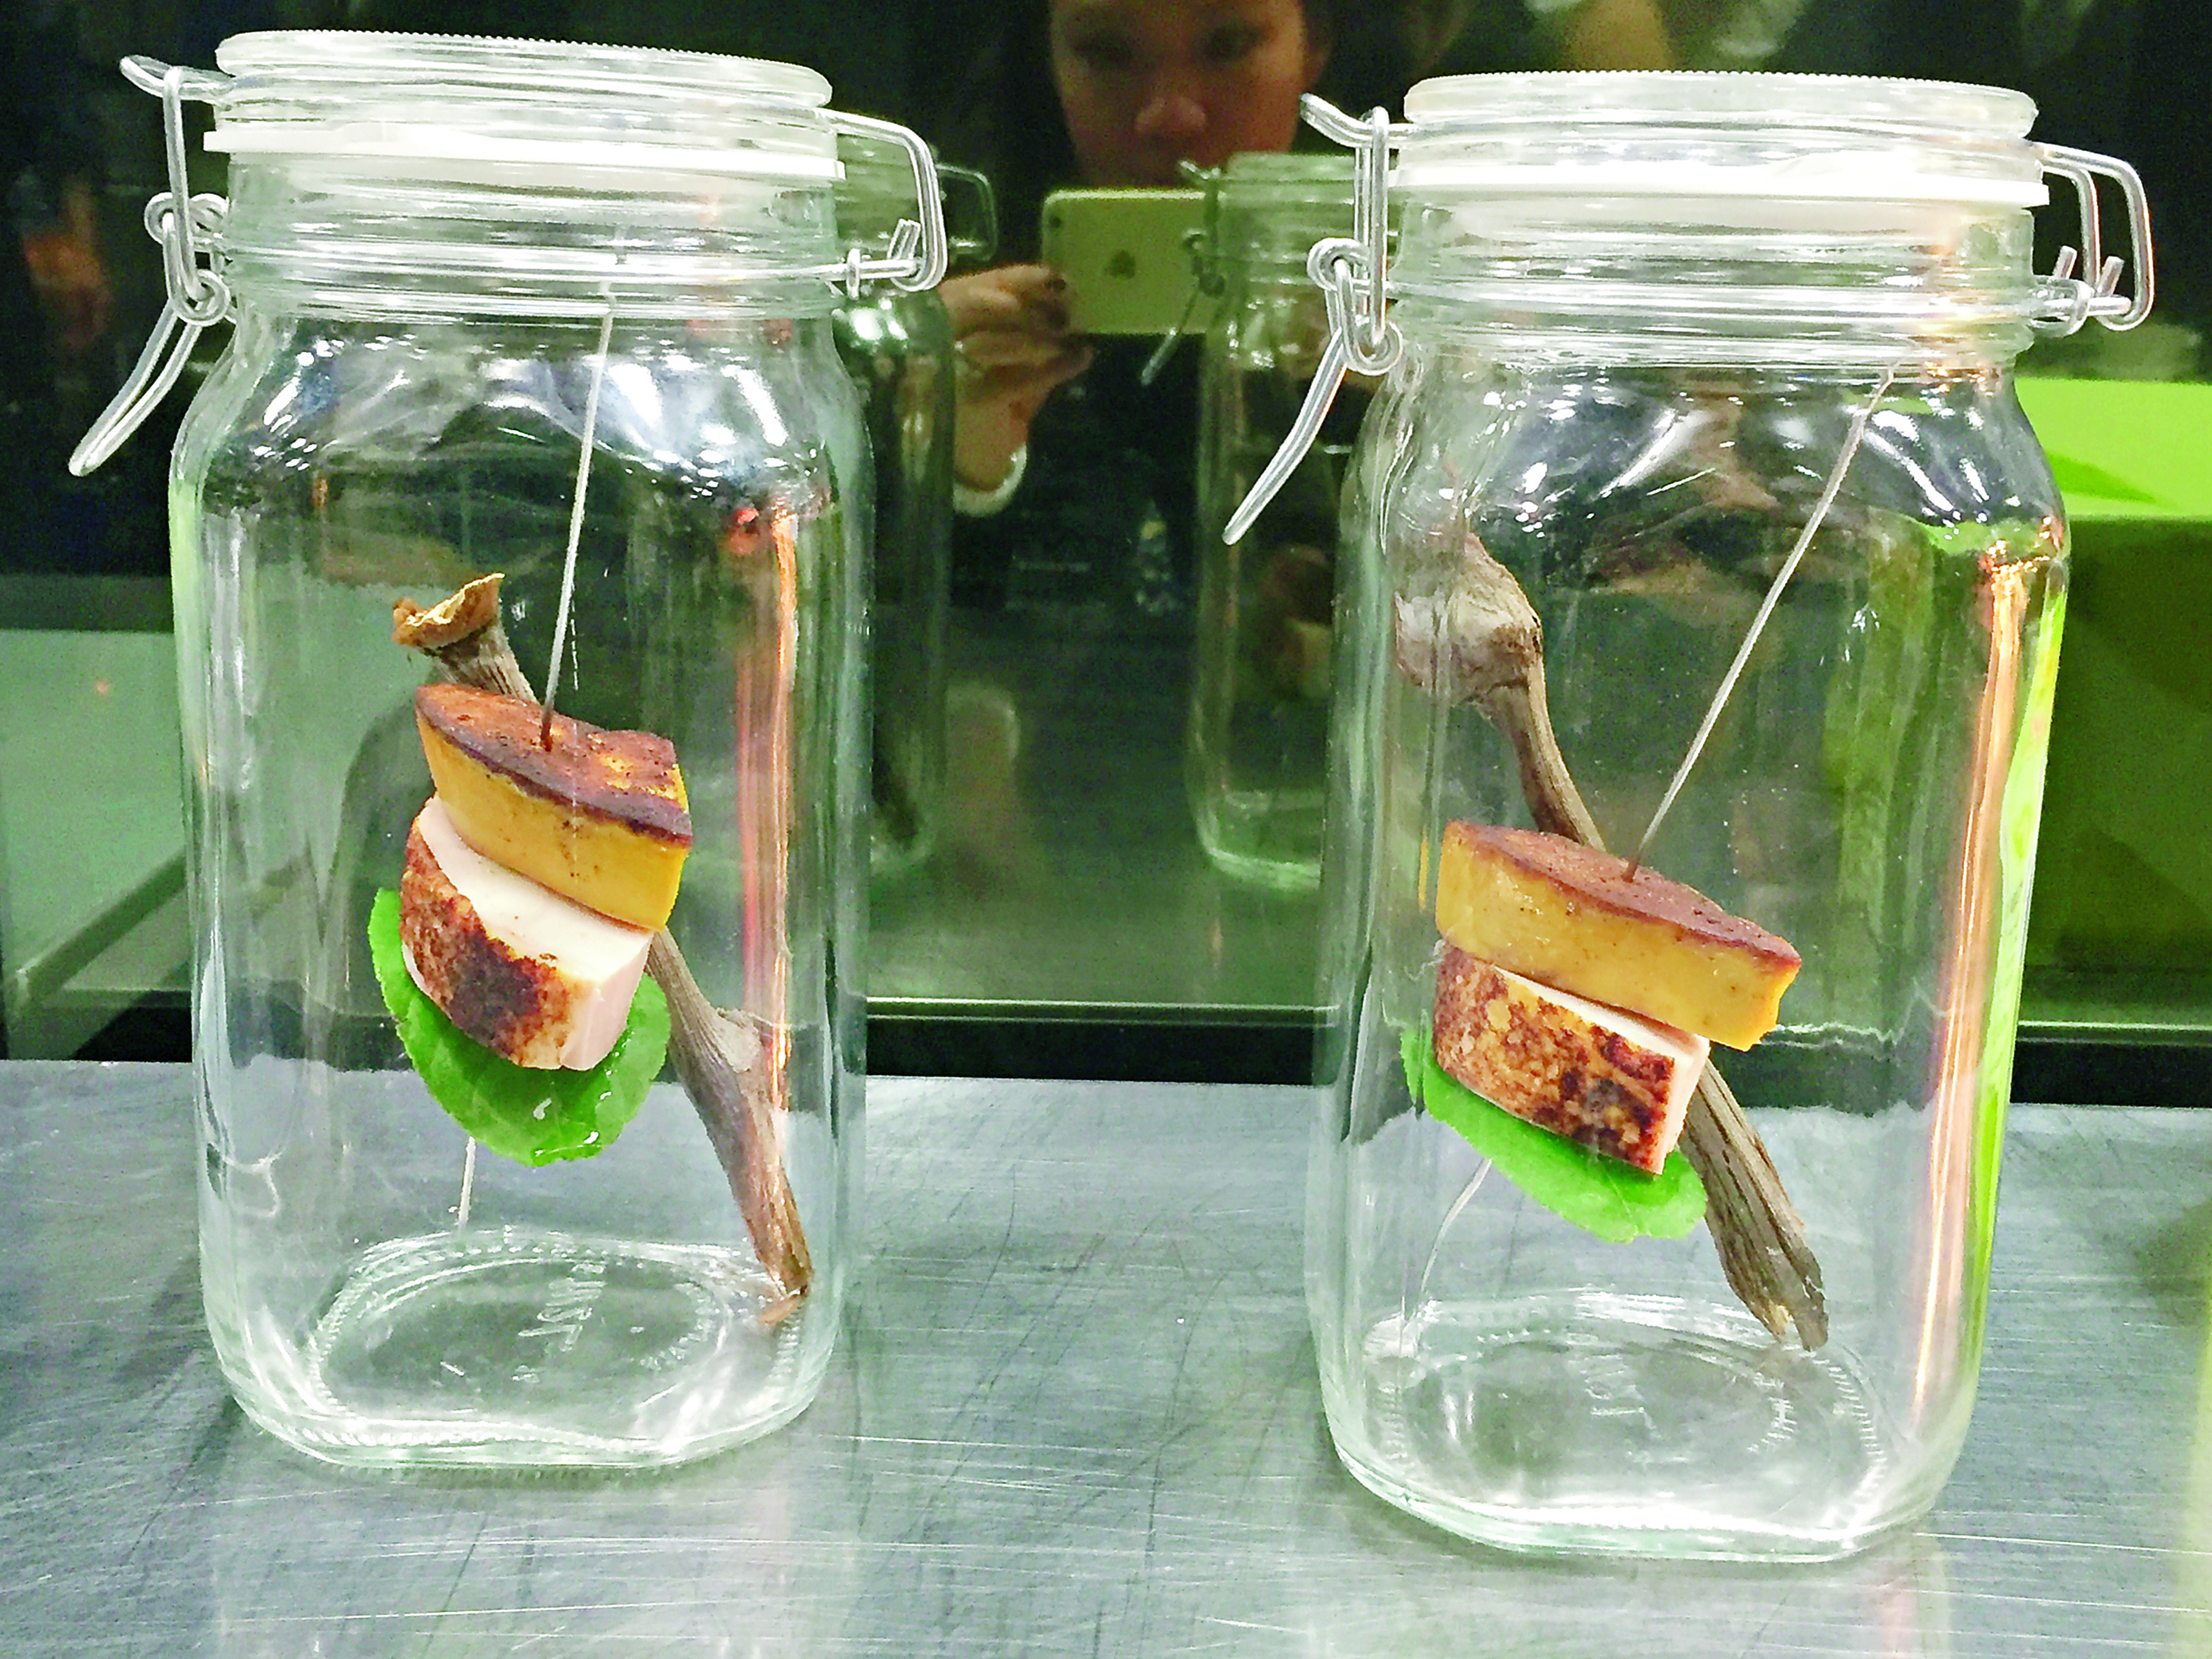 ***ONE TIME USE ONLY, PLEASE CLEAR THE COPYRIGHTS BEFORE RE-USE - OTUO*** This handout image shows chicken in a Jar served underneath a slice of foie gras, which has been smoked by Ultraviolet chef Paul Pairet in Shanghai. Photo / Juliana Loh [05FEBRUARY2016 FEATURES FOOD & WINE]